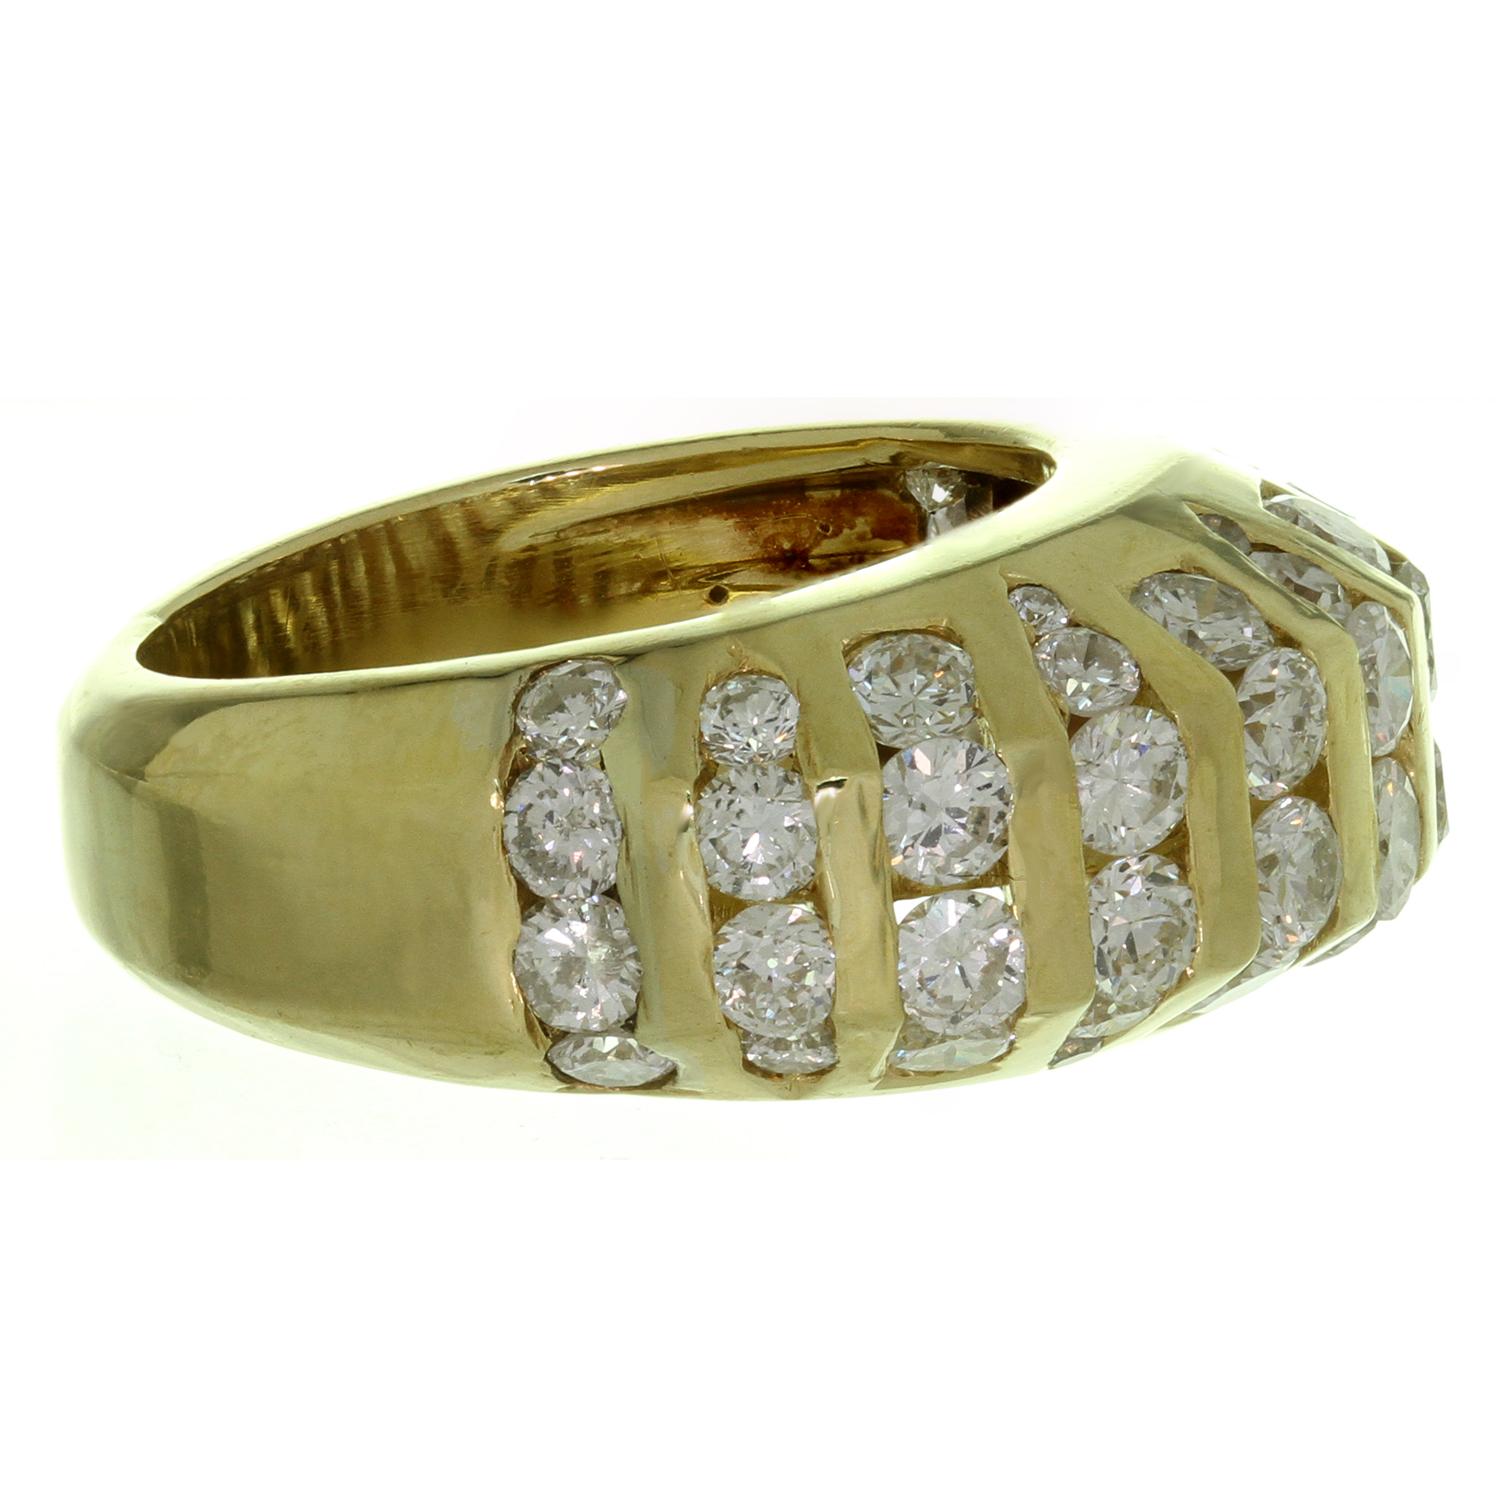 Brilliant Cut Channel-Set Diamond Domed Yellow Gold Estate Ring